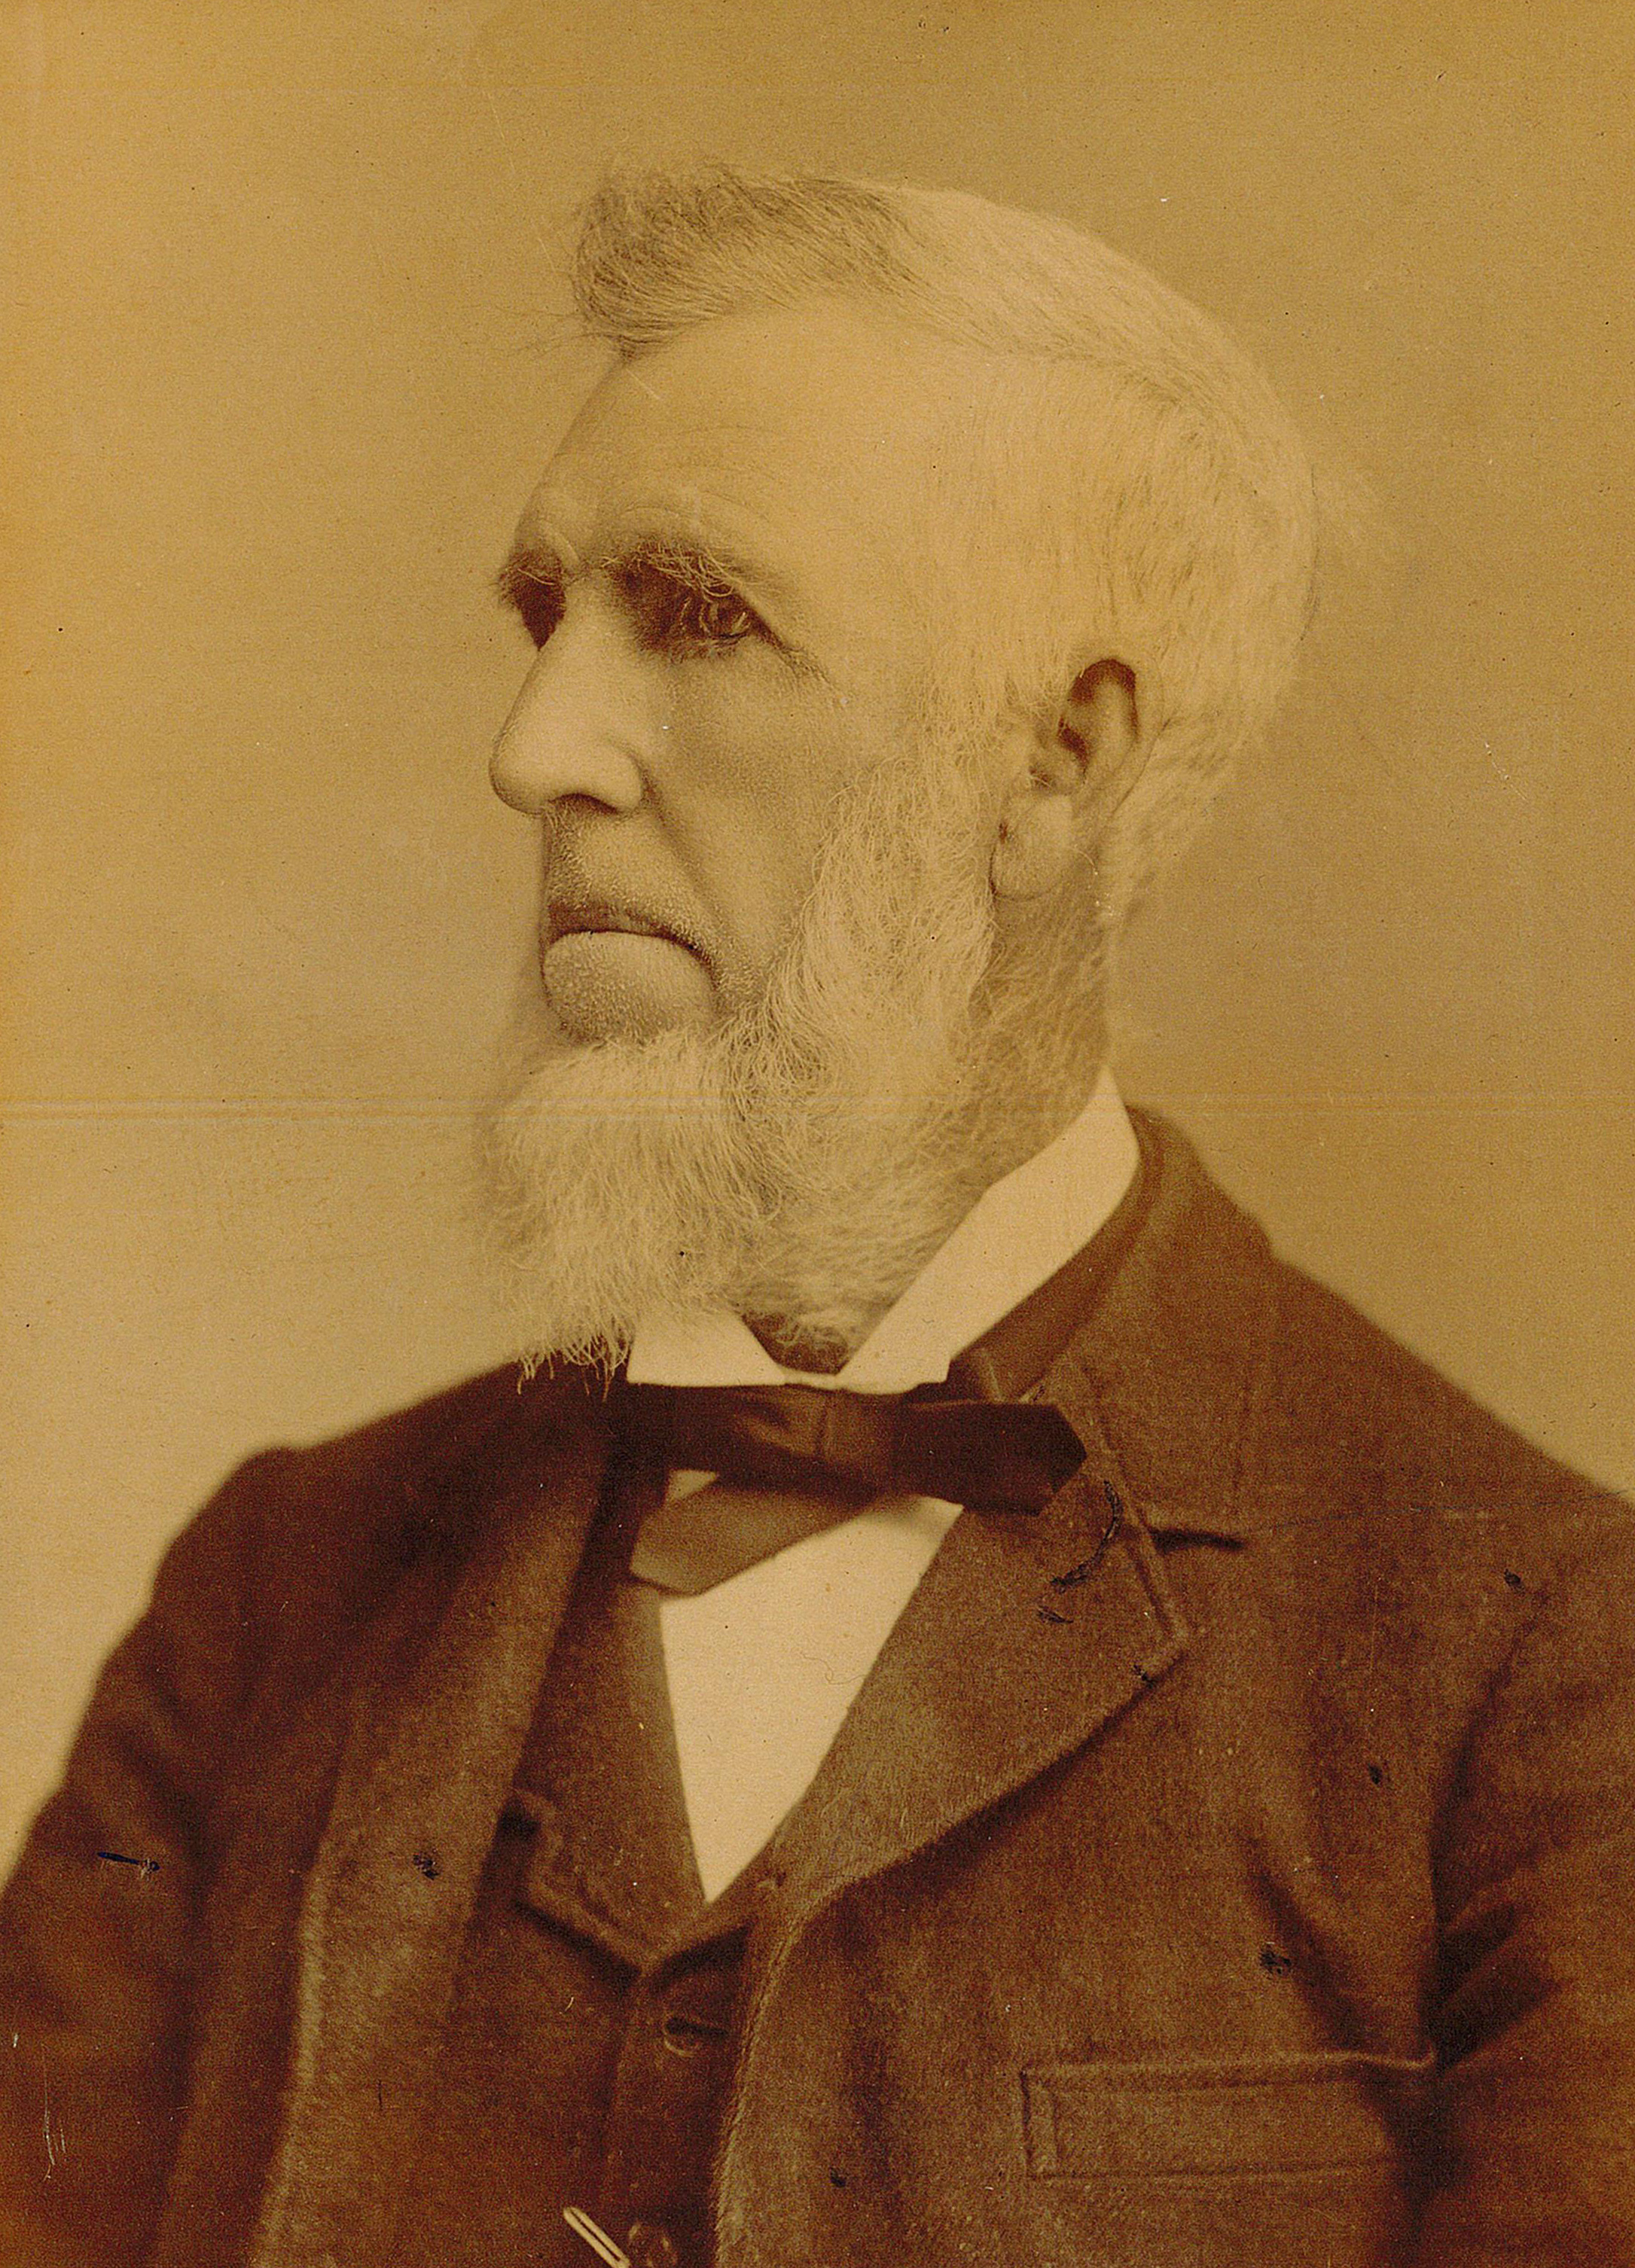 Portrait of E.D. Tillson. Tillson has a large, white, chin strap style beard and is wearing a suit and bowtie.